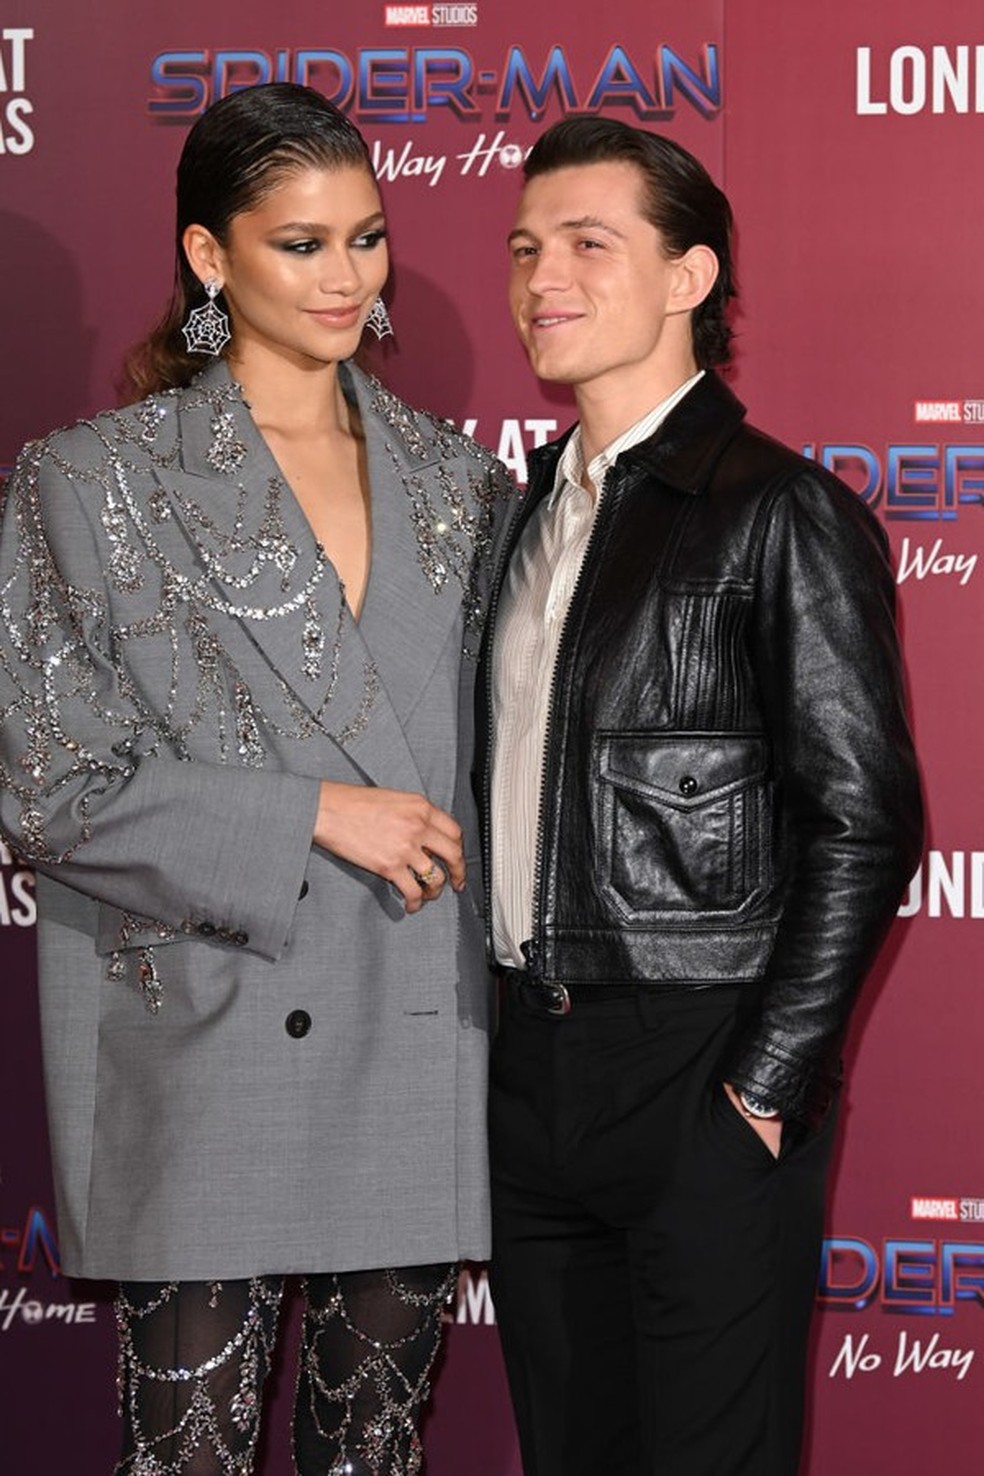 LONDON, ENGLAND - DECEMBER 05: Zendaya and Tom Holland attend a photocall for "Spiderman: No Way Home" at The Old Sessions House on December 05, 2021 in London, England. (Photo by Karwai Tang/WireImage) (Foto: WireImage) — Foto: Vogue